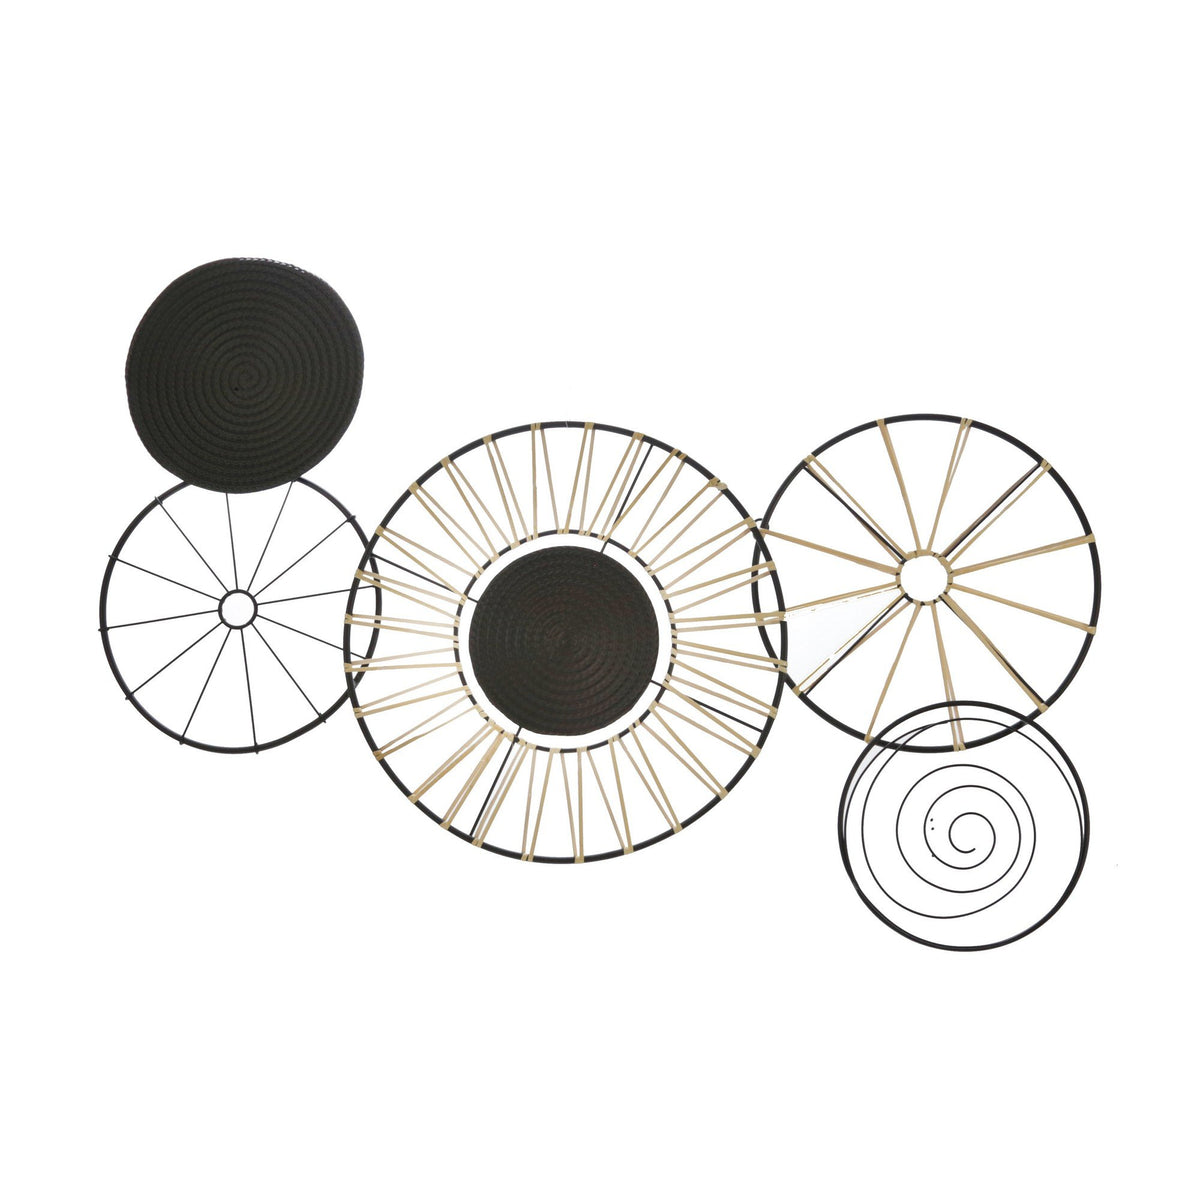 Circular 5 Piece Metal Wall Decor With Wheel And Plate Design, Black